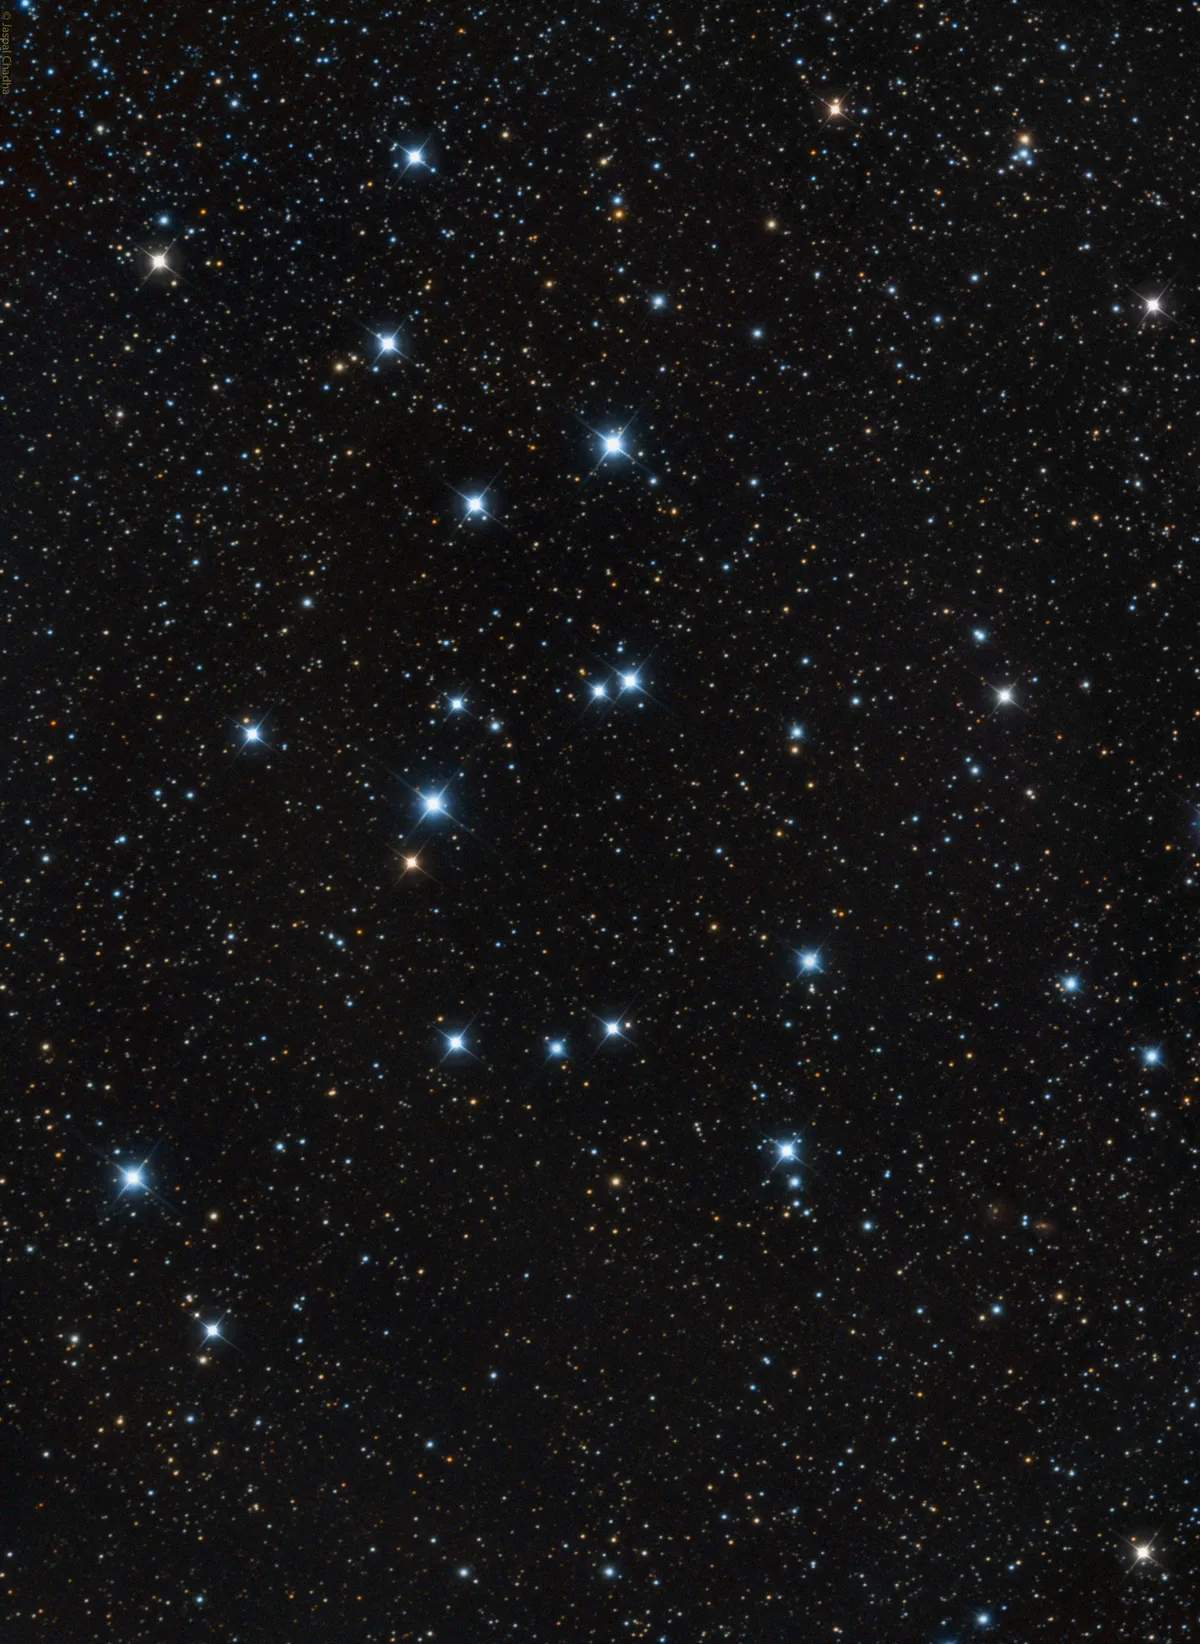 M39 is 800 light years distant, and its stars are about 300 million years old. It has between 30 and 50 stars forming an attractive triangular shape.